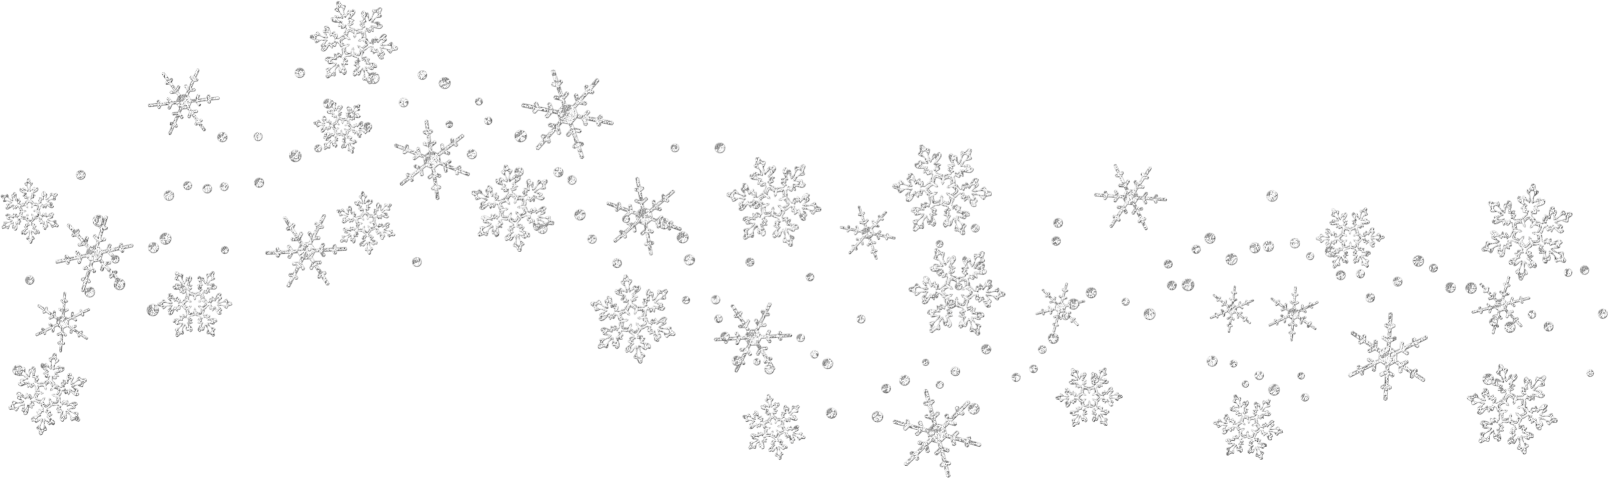 isolated, pattern, christmas png images background